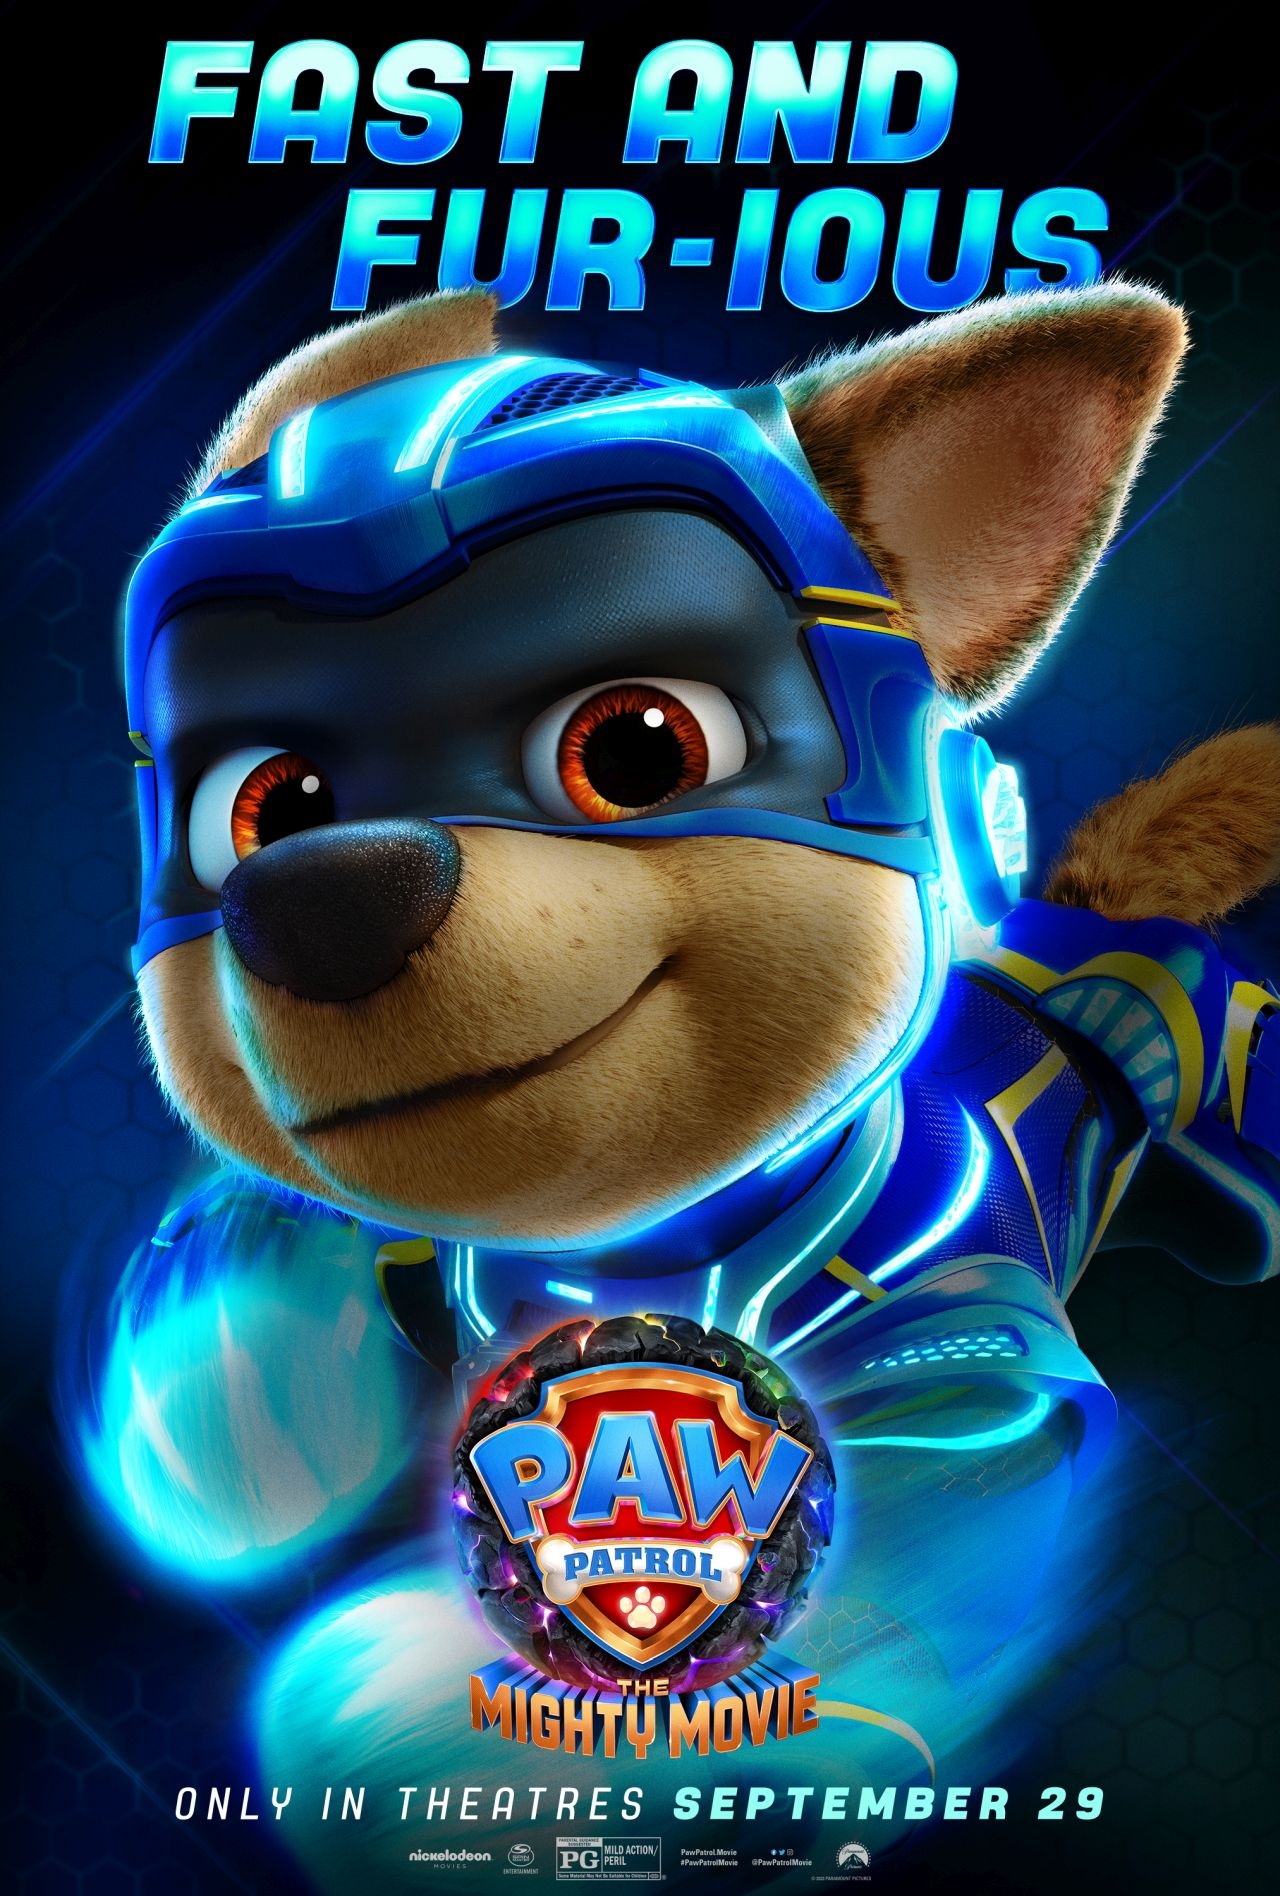 PAW Patrol: The Mighty Movie' Review: A Super-Powered Sequel